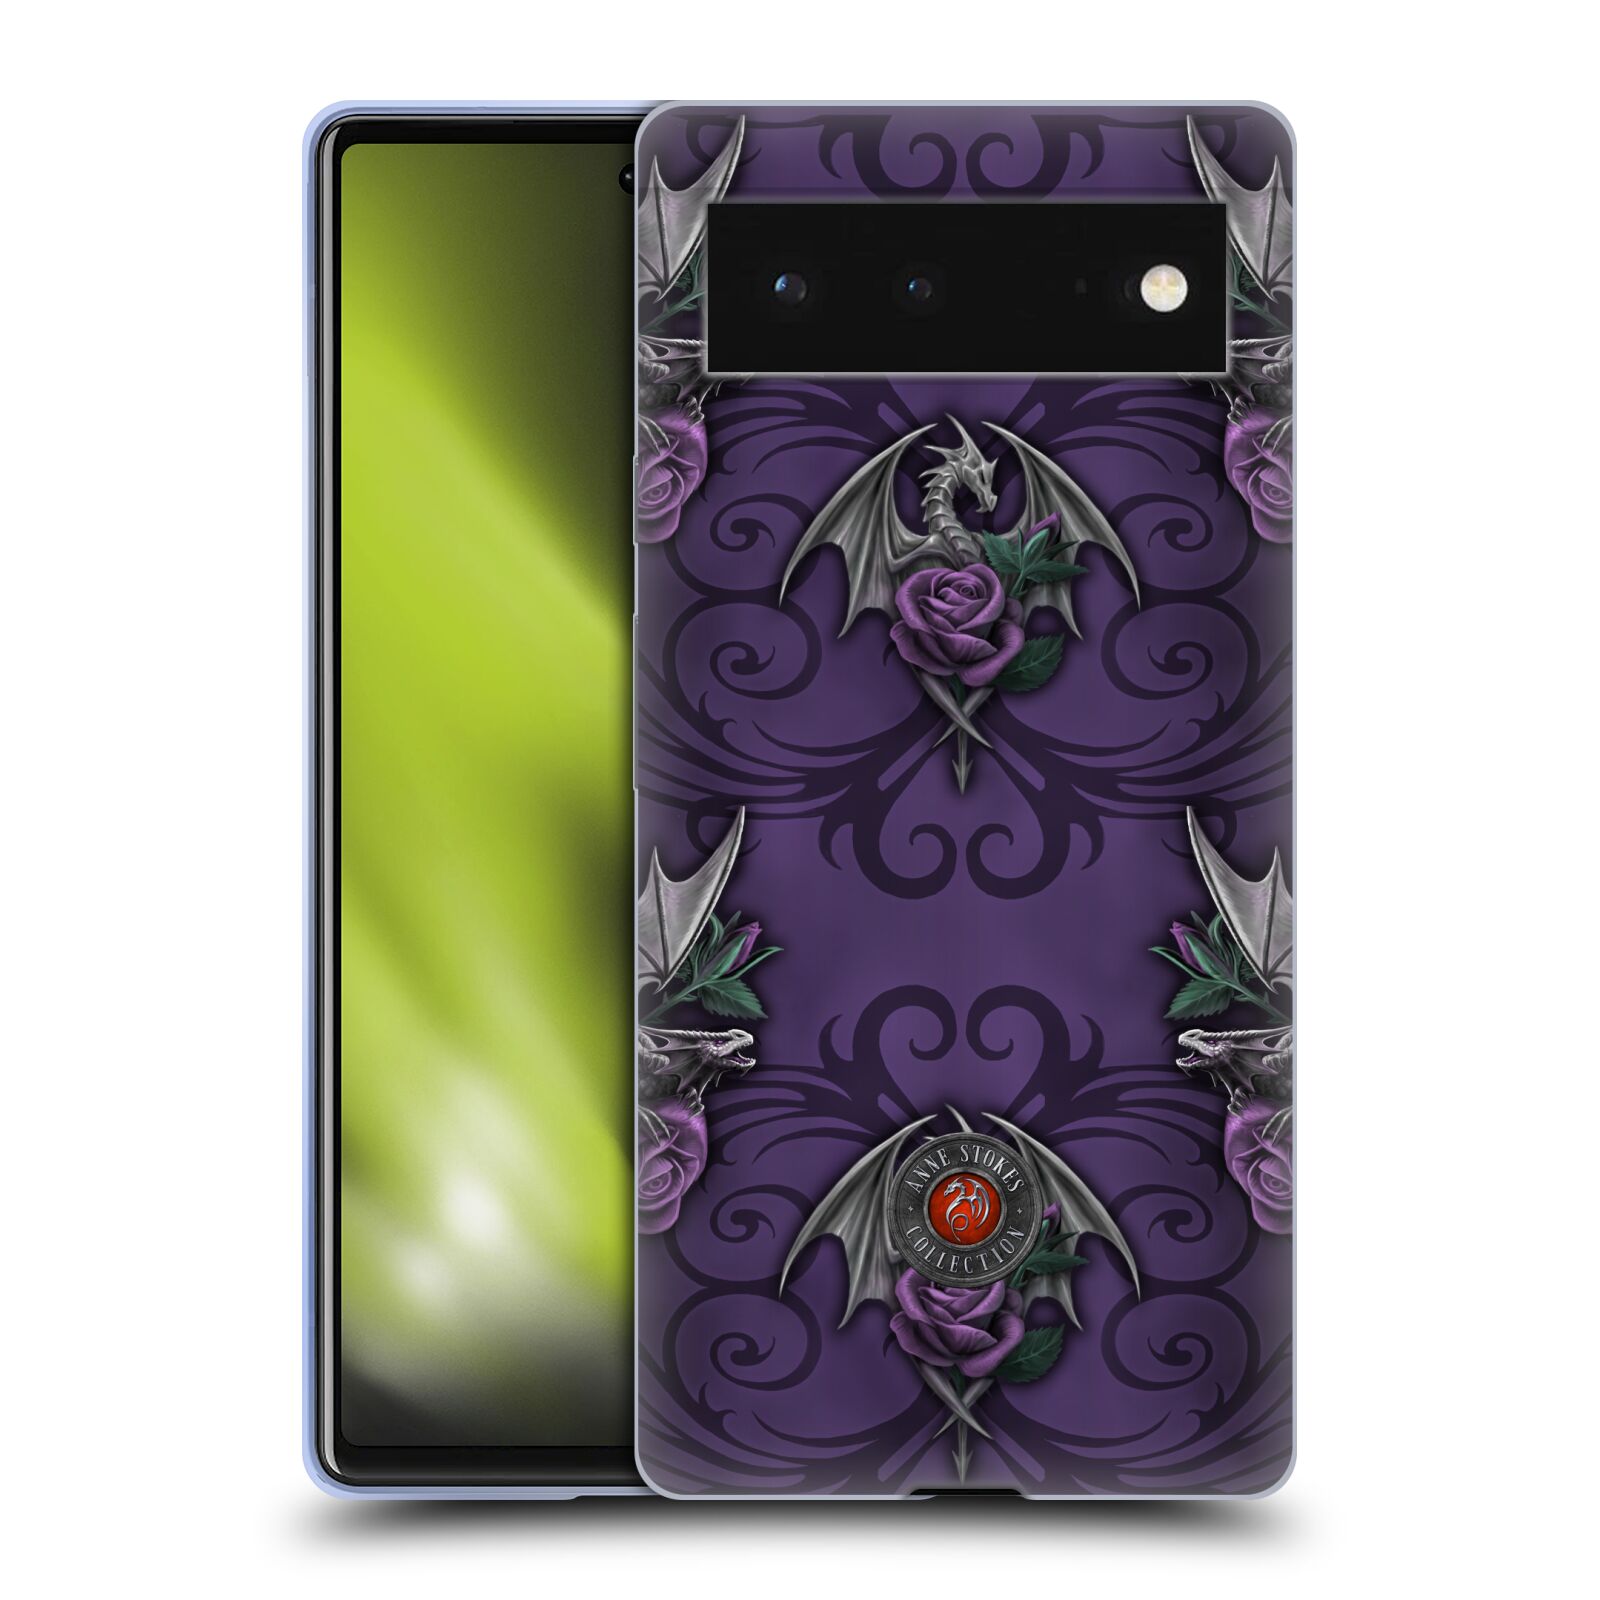 Head Case Designs Officially Licensed Anne Stokes Dragons 3 Pattern Soft Gel Case Compatible with Google Pixel 6 - image 1 of 7